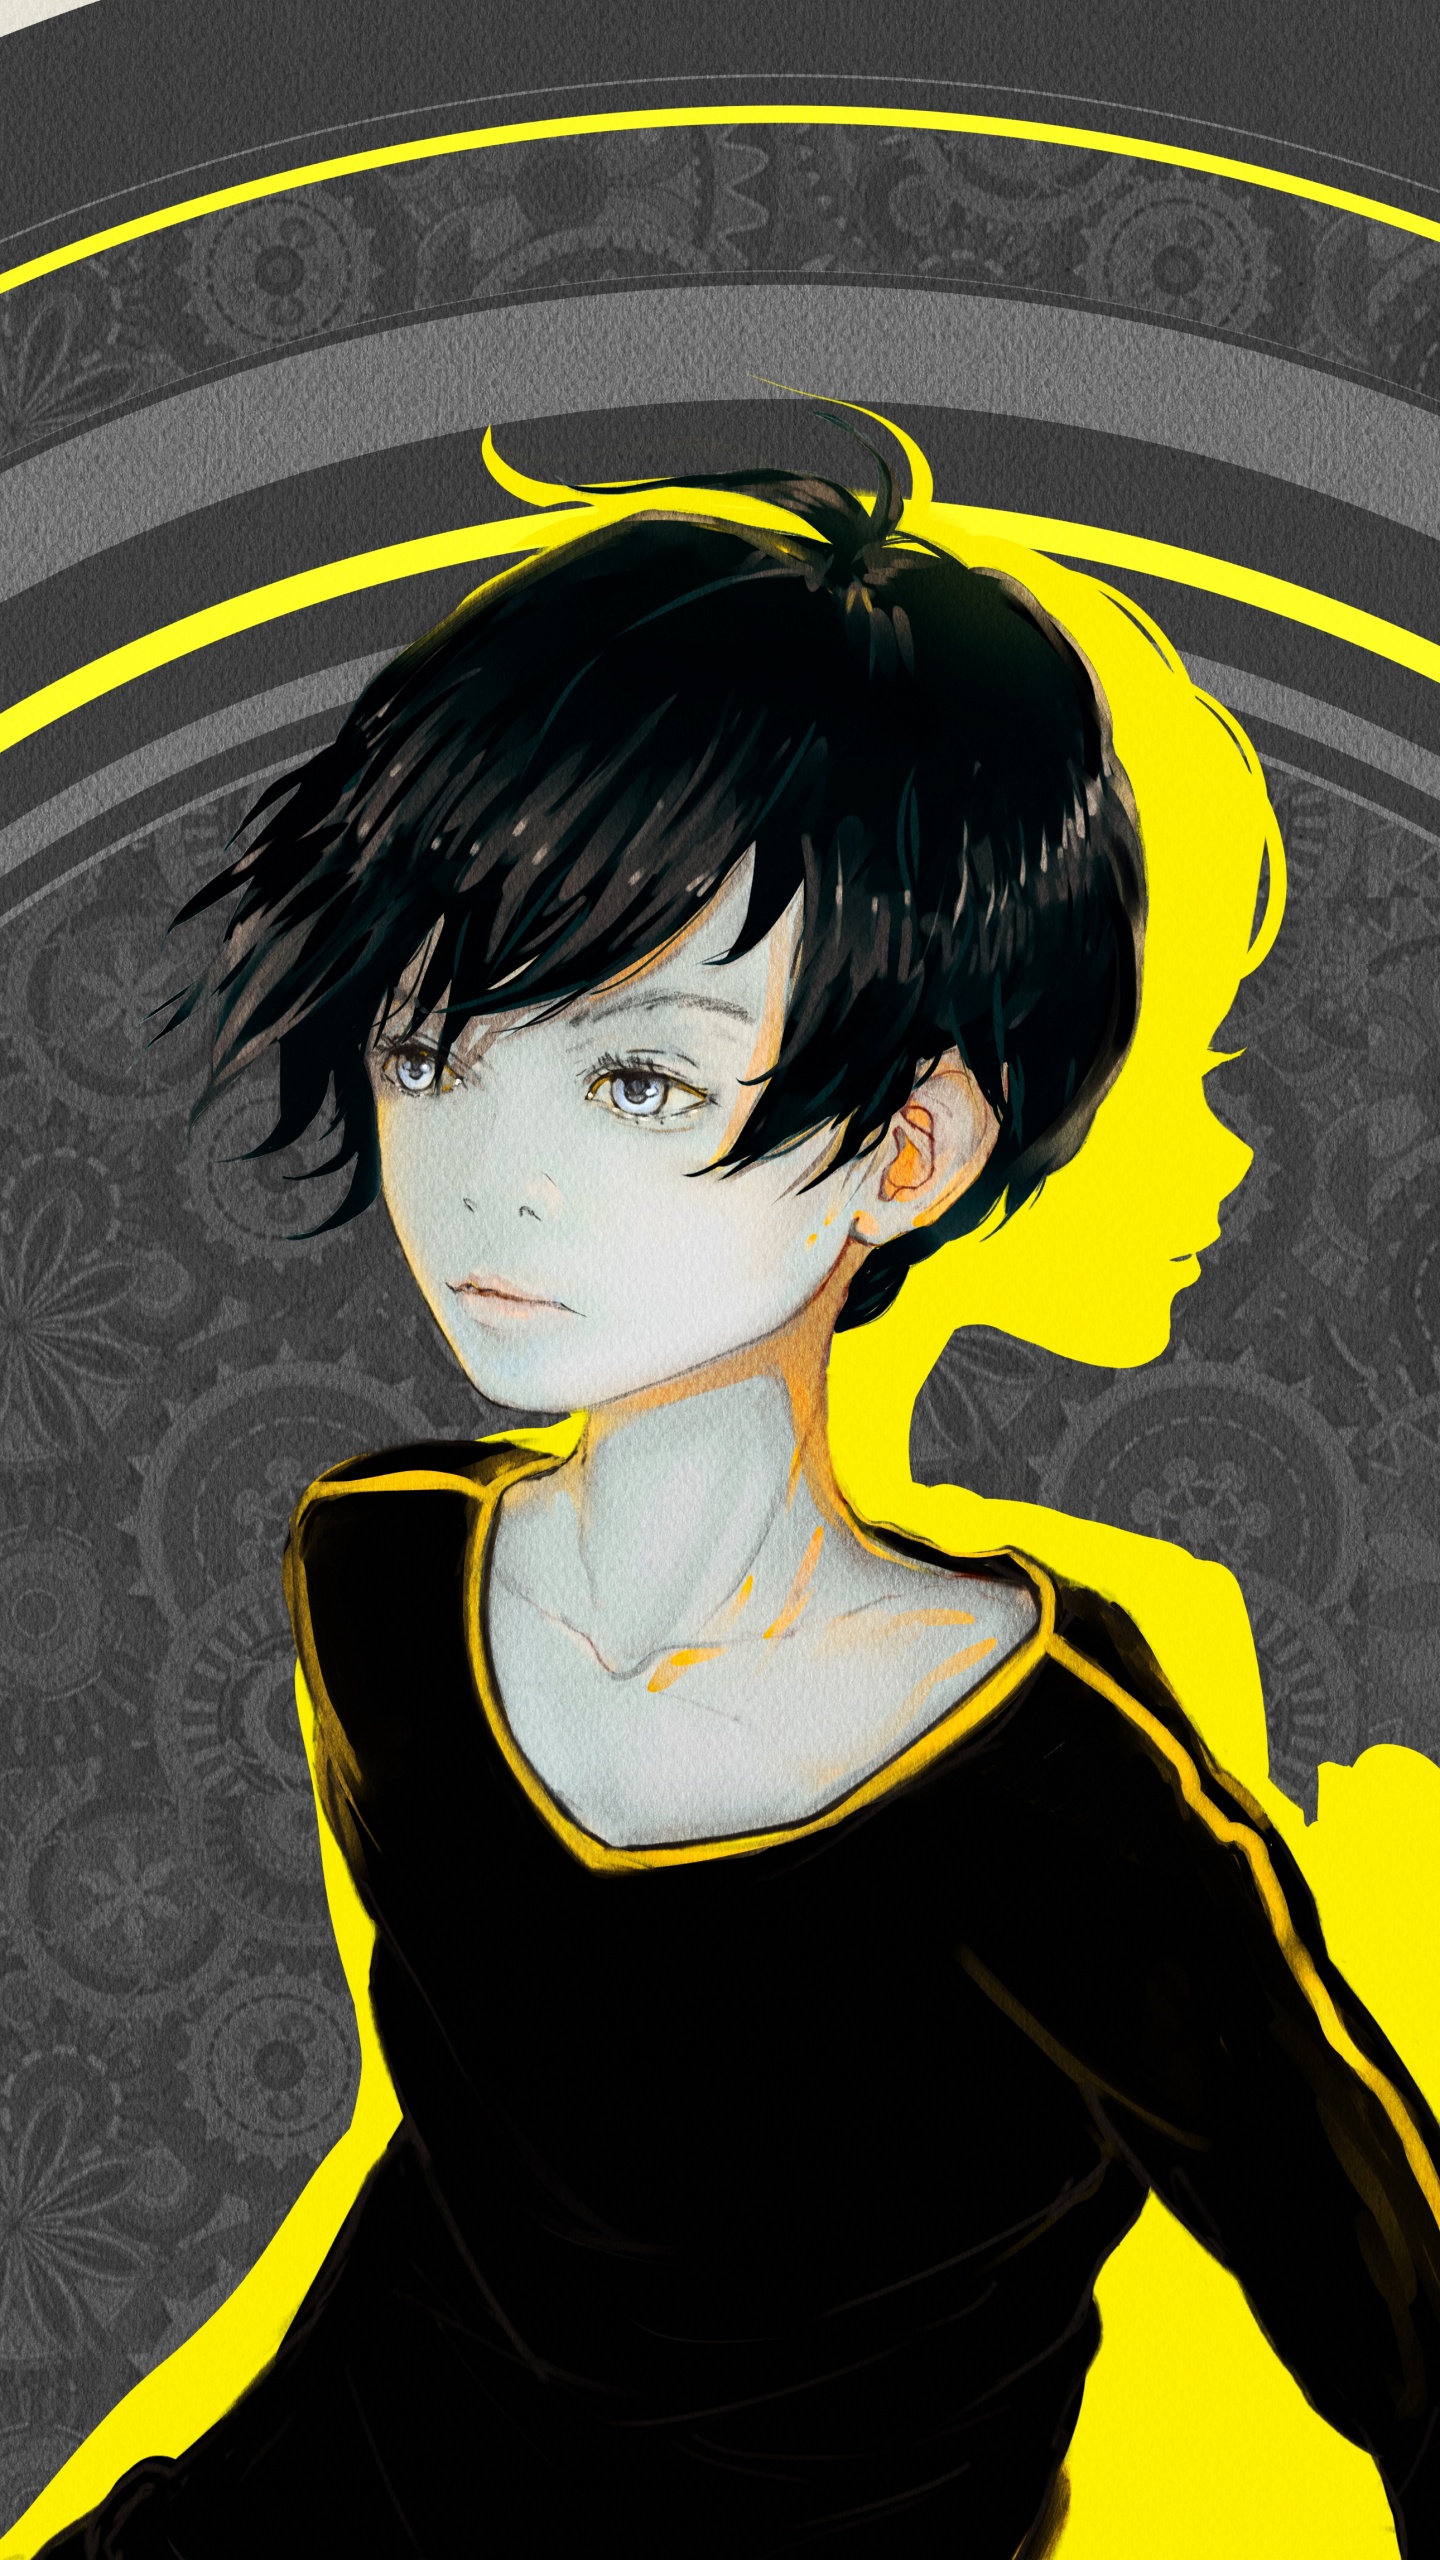 Personnage D'anime Masculin Aux Cheveux Noirs. Wallpaper in 1440x2560 Resolution